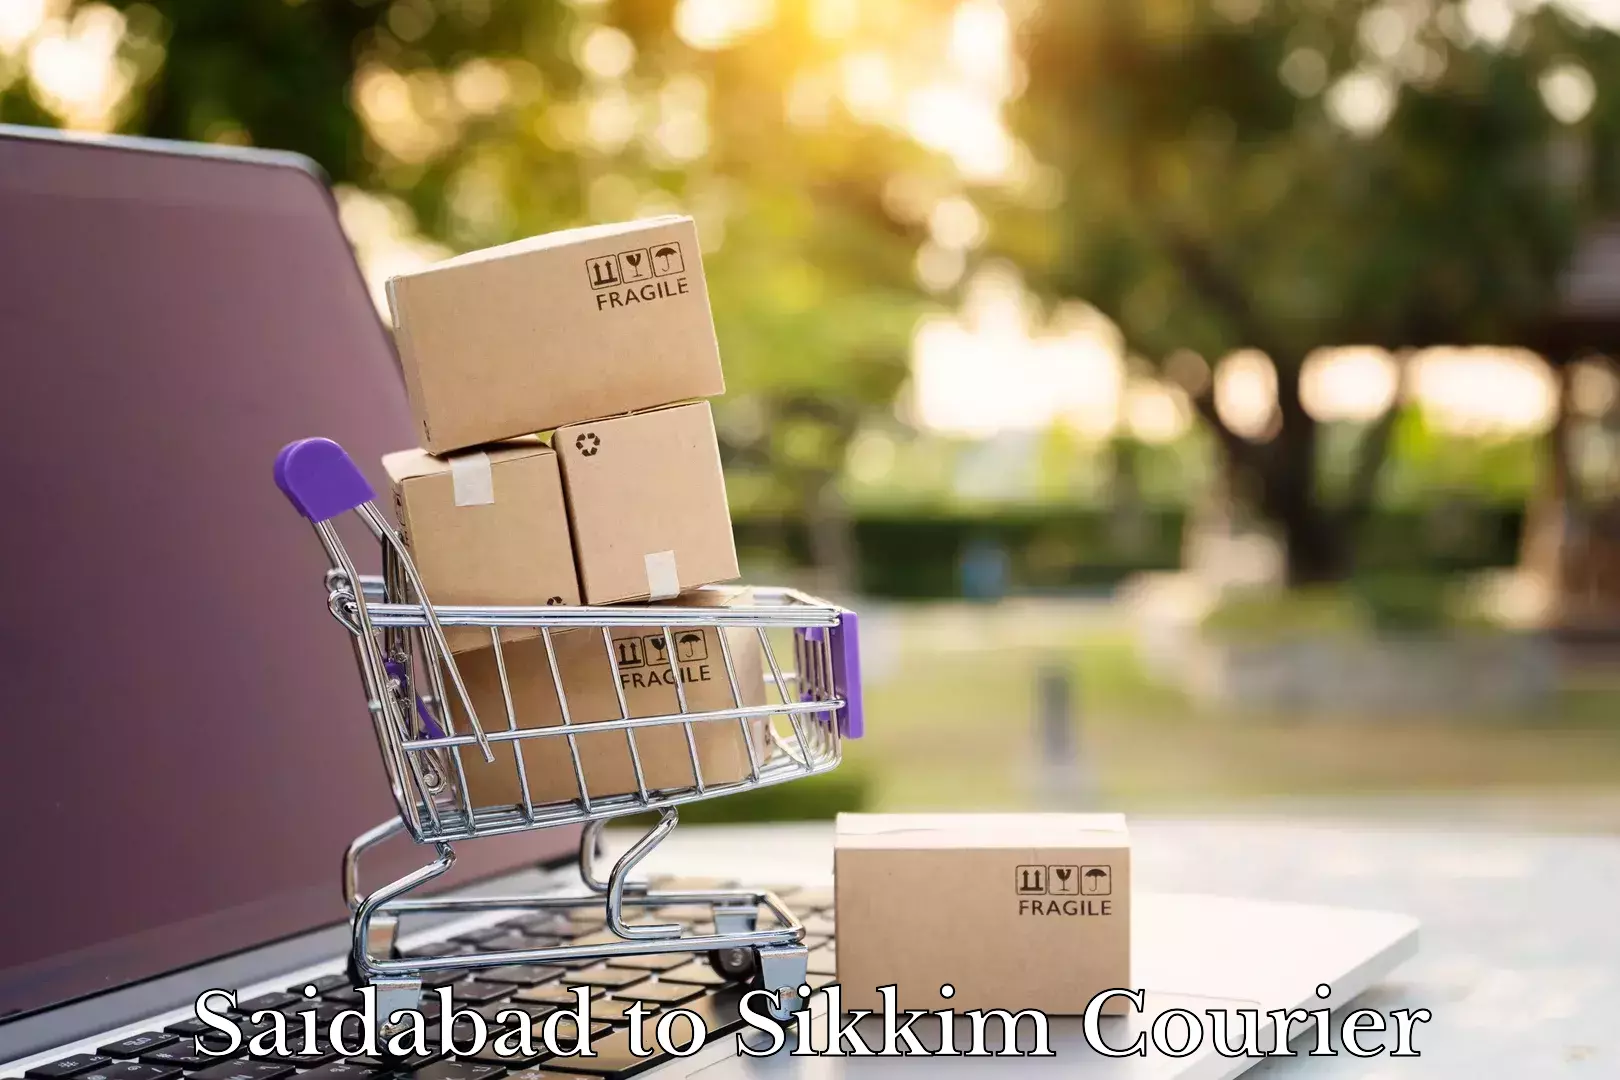 Courier service innovation Saidabad to Sikkim